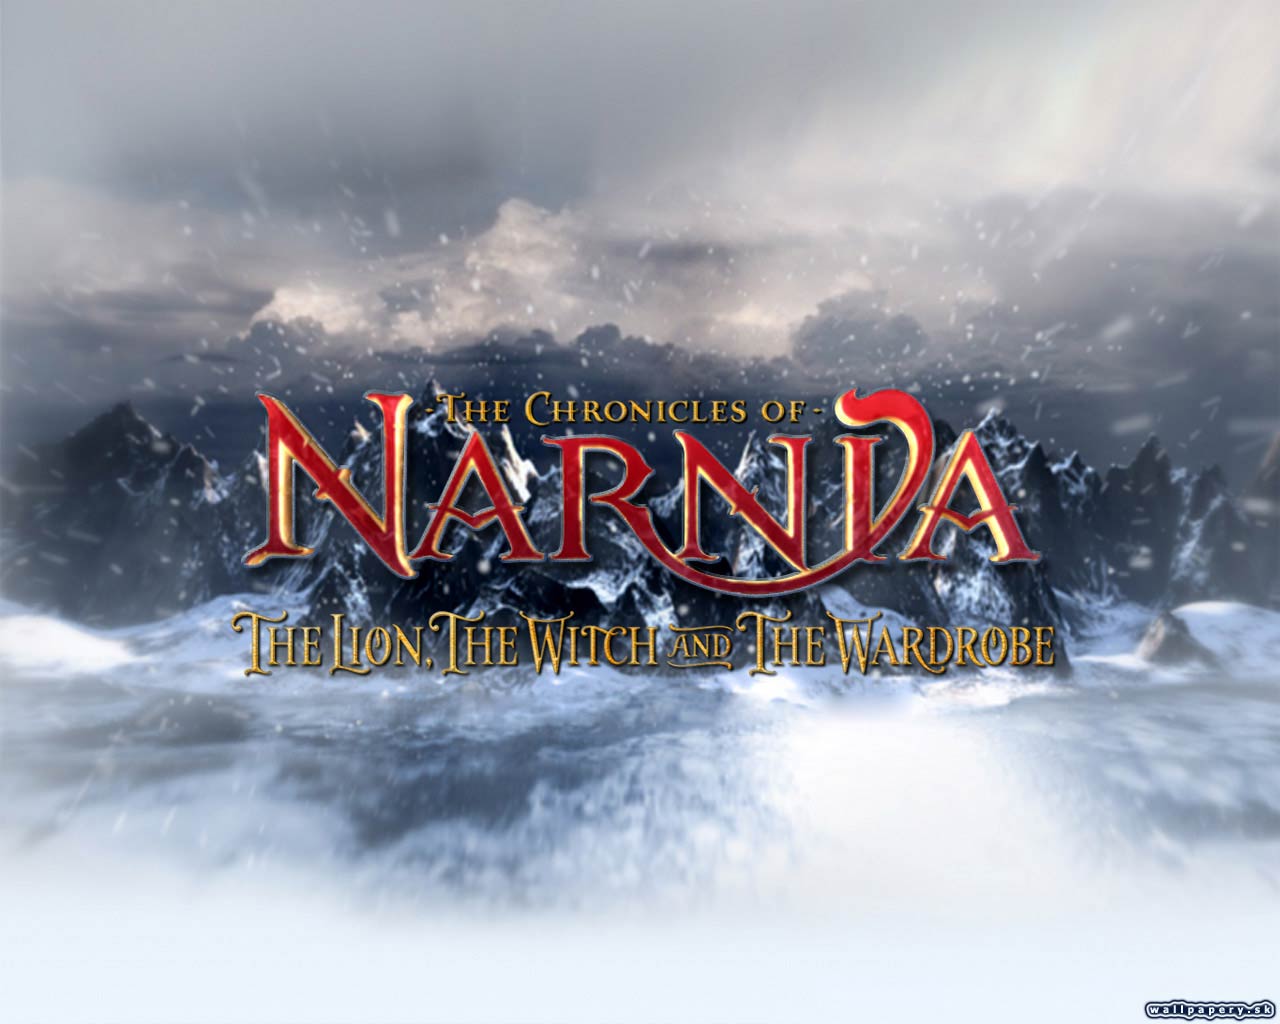 The Chronicles of Narnia: The Lion, The Witch and the Wardrobe - wallpaper 6